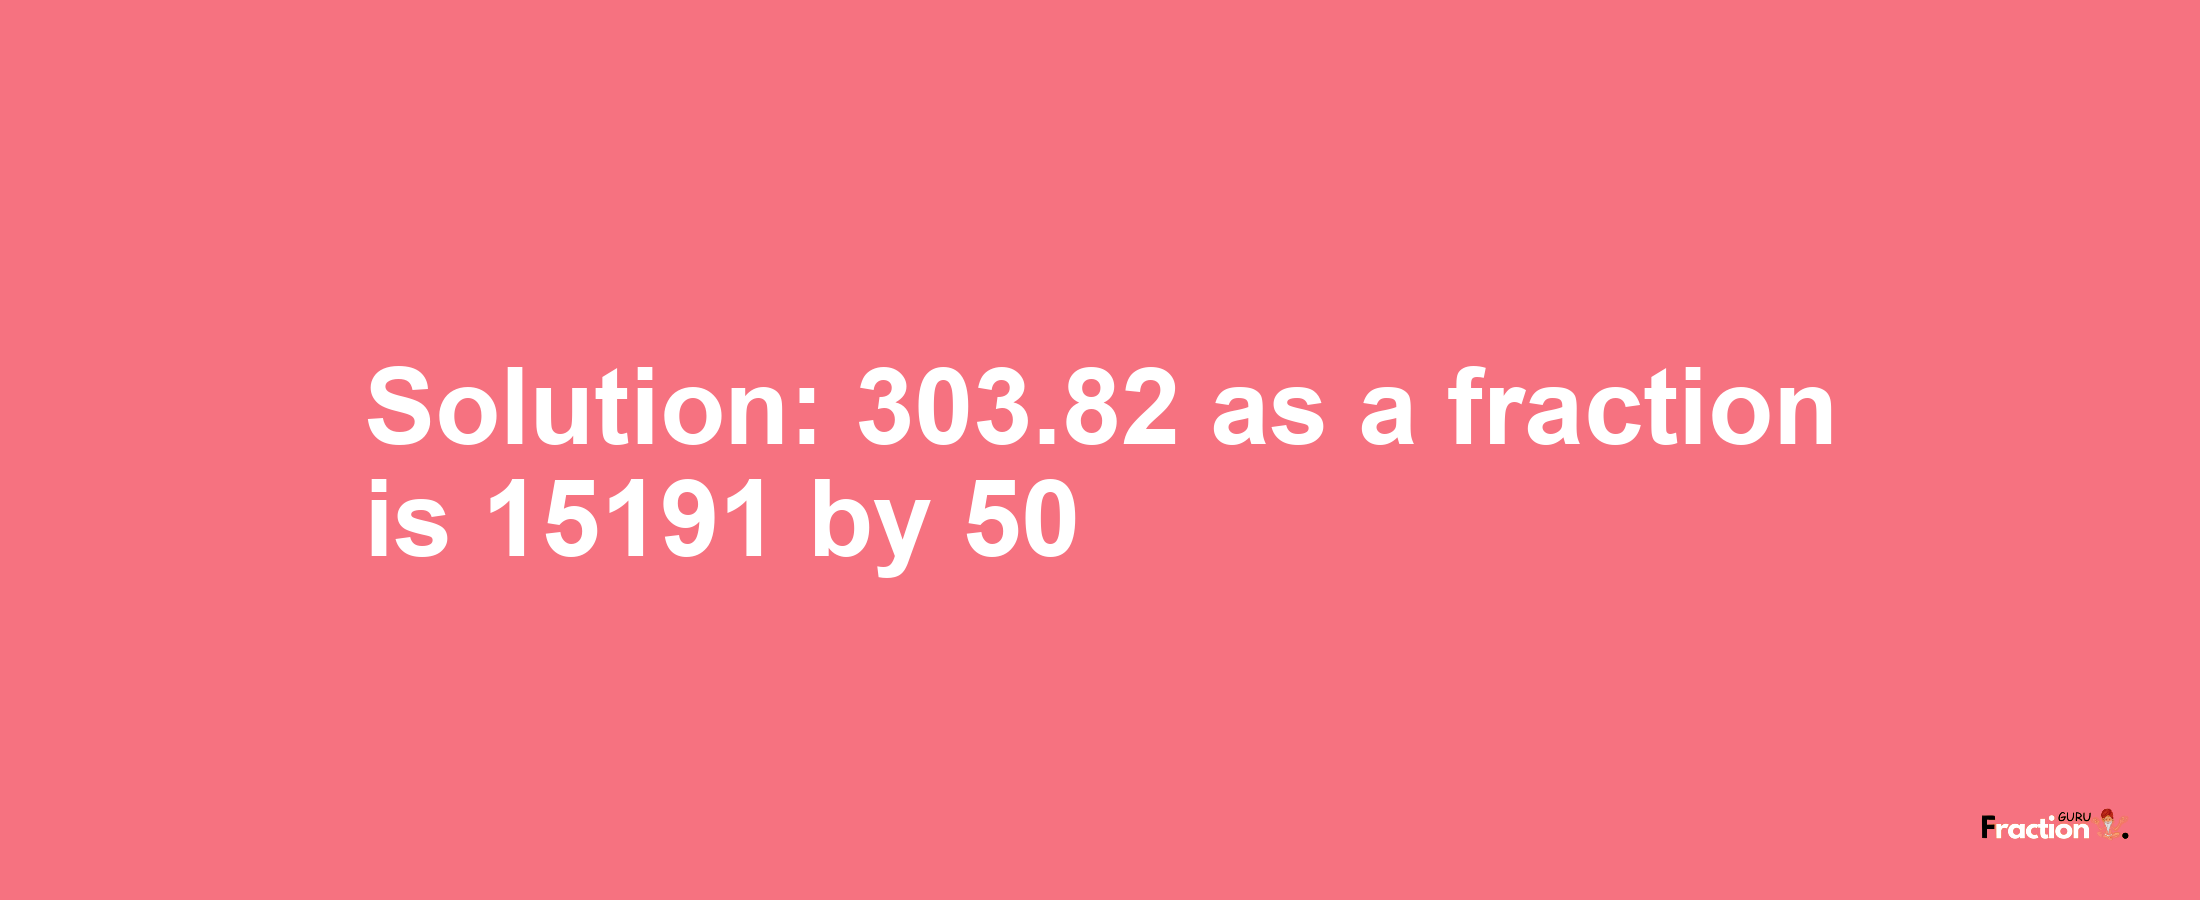 Solution:303.82 as a fraction is 15191/50